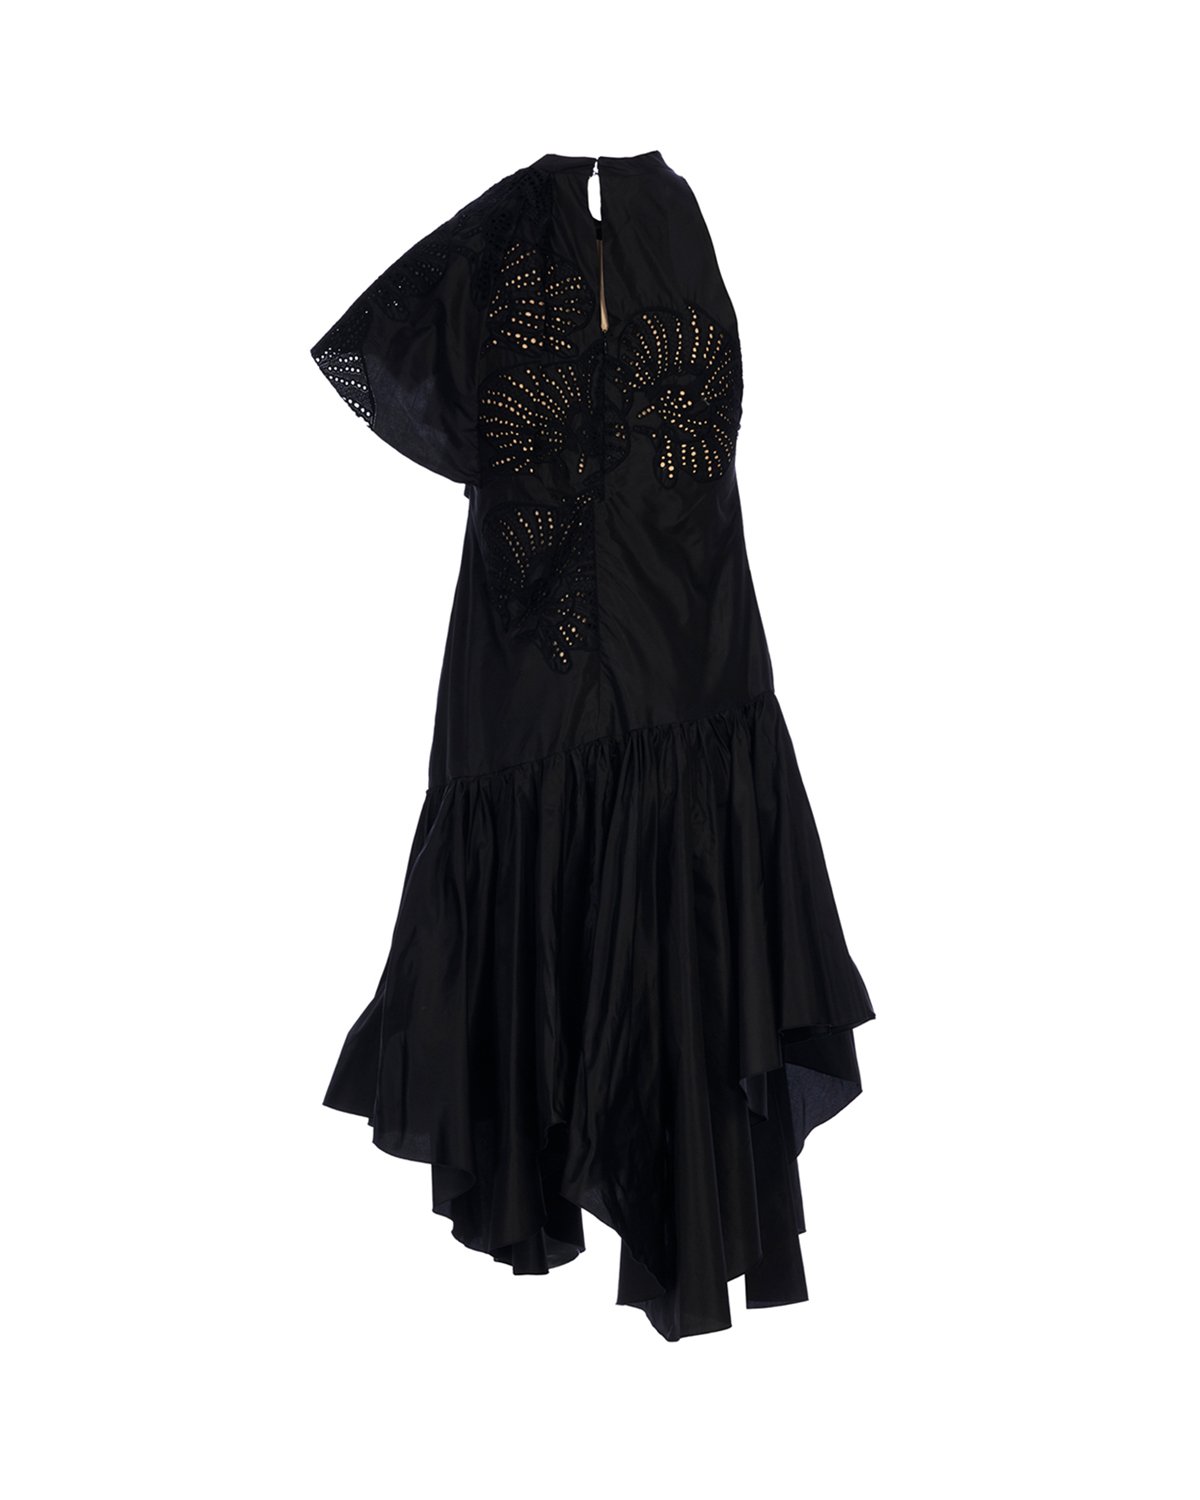 Black silk taffeta dress with orchid embroidery | Temporary Flash Sale | Genny